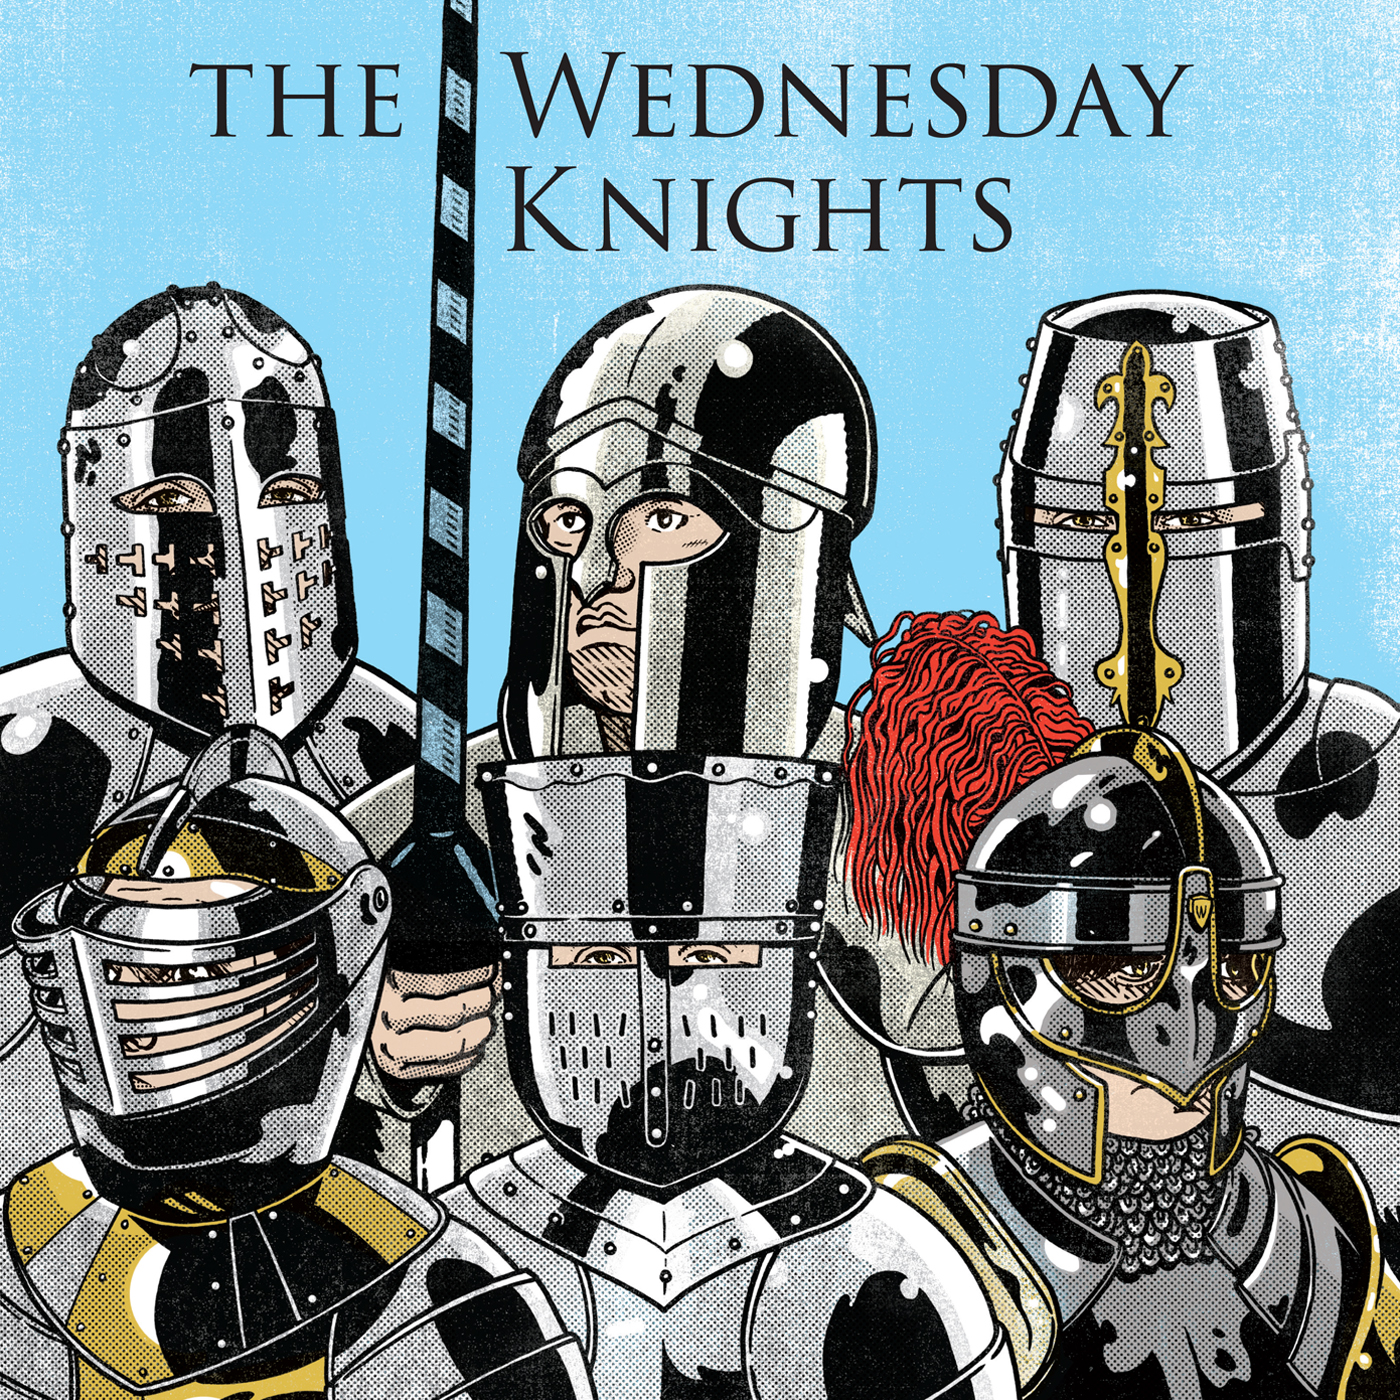 The Wednesday Knights